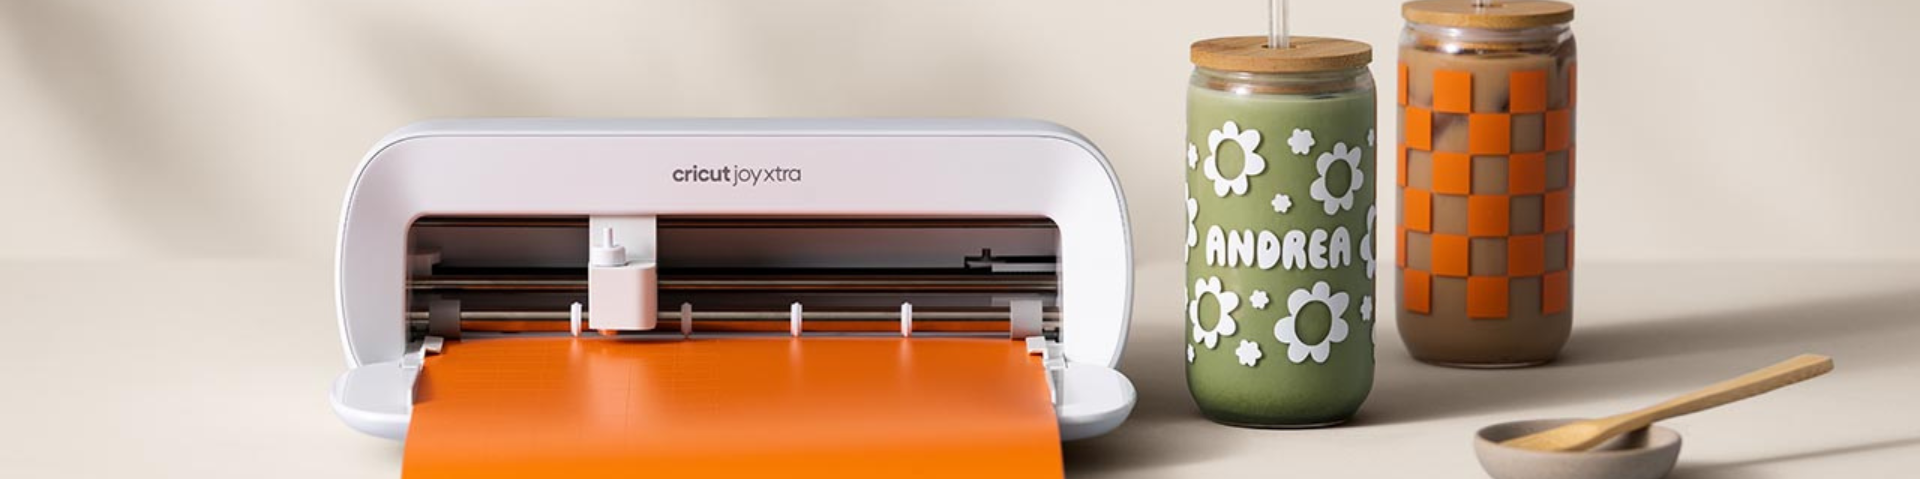 Getting Started with Cricut Joy Xtra